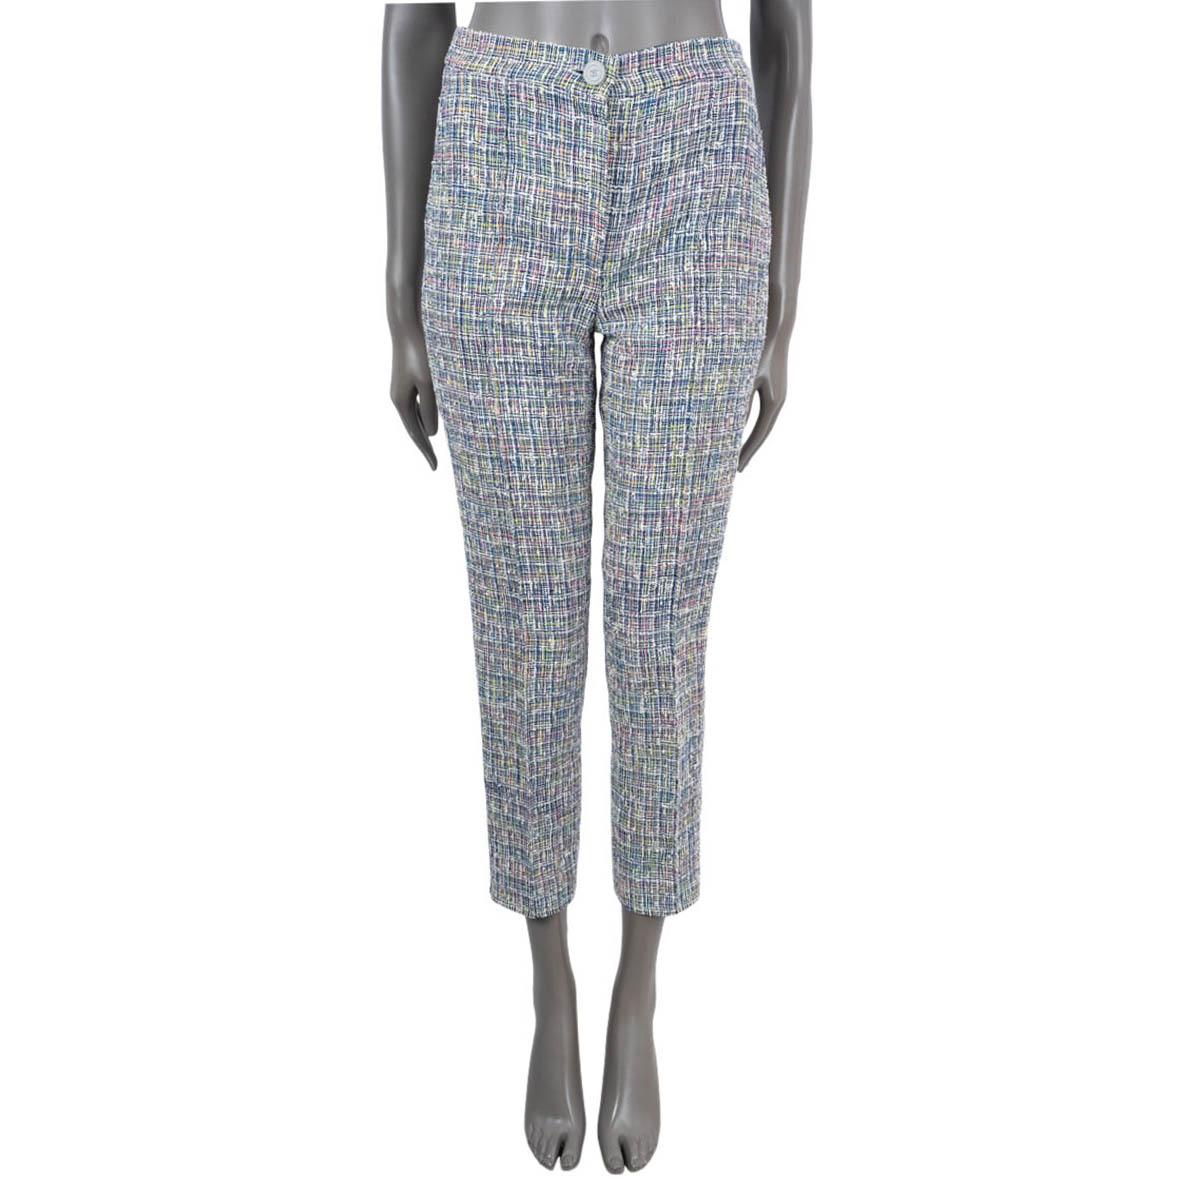 100% authentic Chanel tweed pants in blue, yellow, green, pink, off-white and blue acrylic (53%), cotton (31%), nylon (10%) and polyester (6%). Features a cropped, straight-leg and two slit pockets. Closes with a CC button and concealed zip. Lined